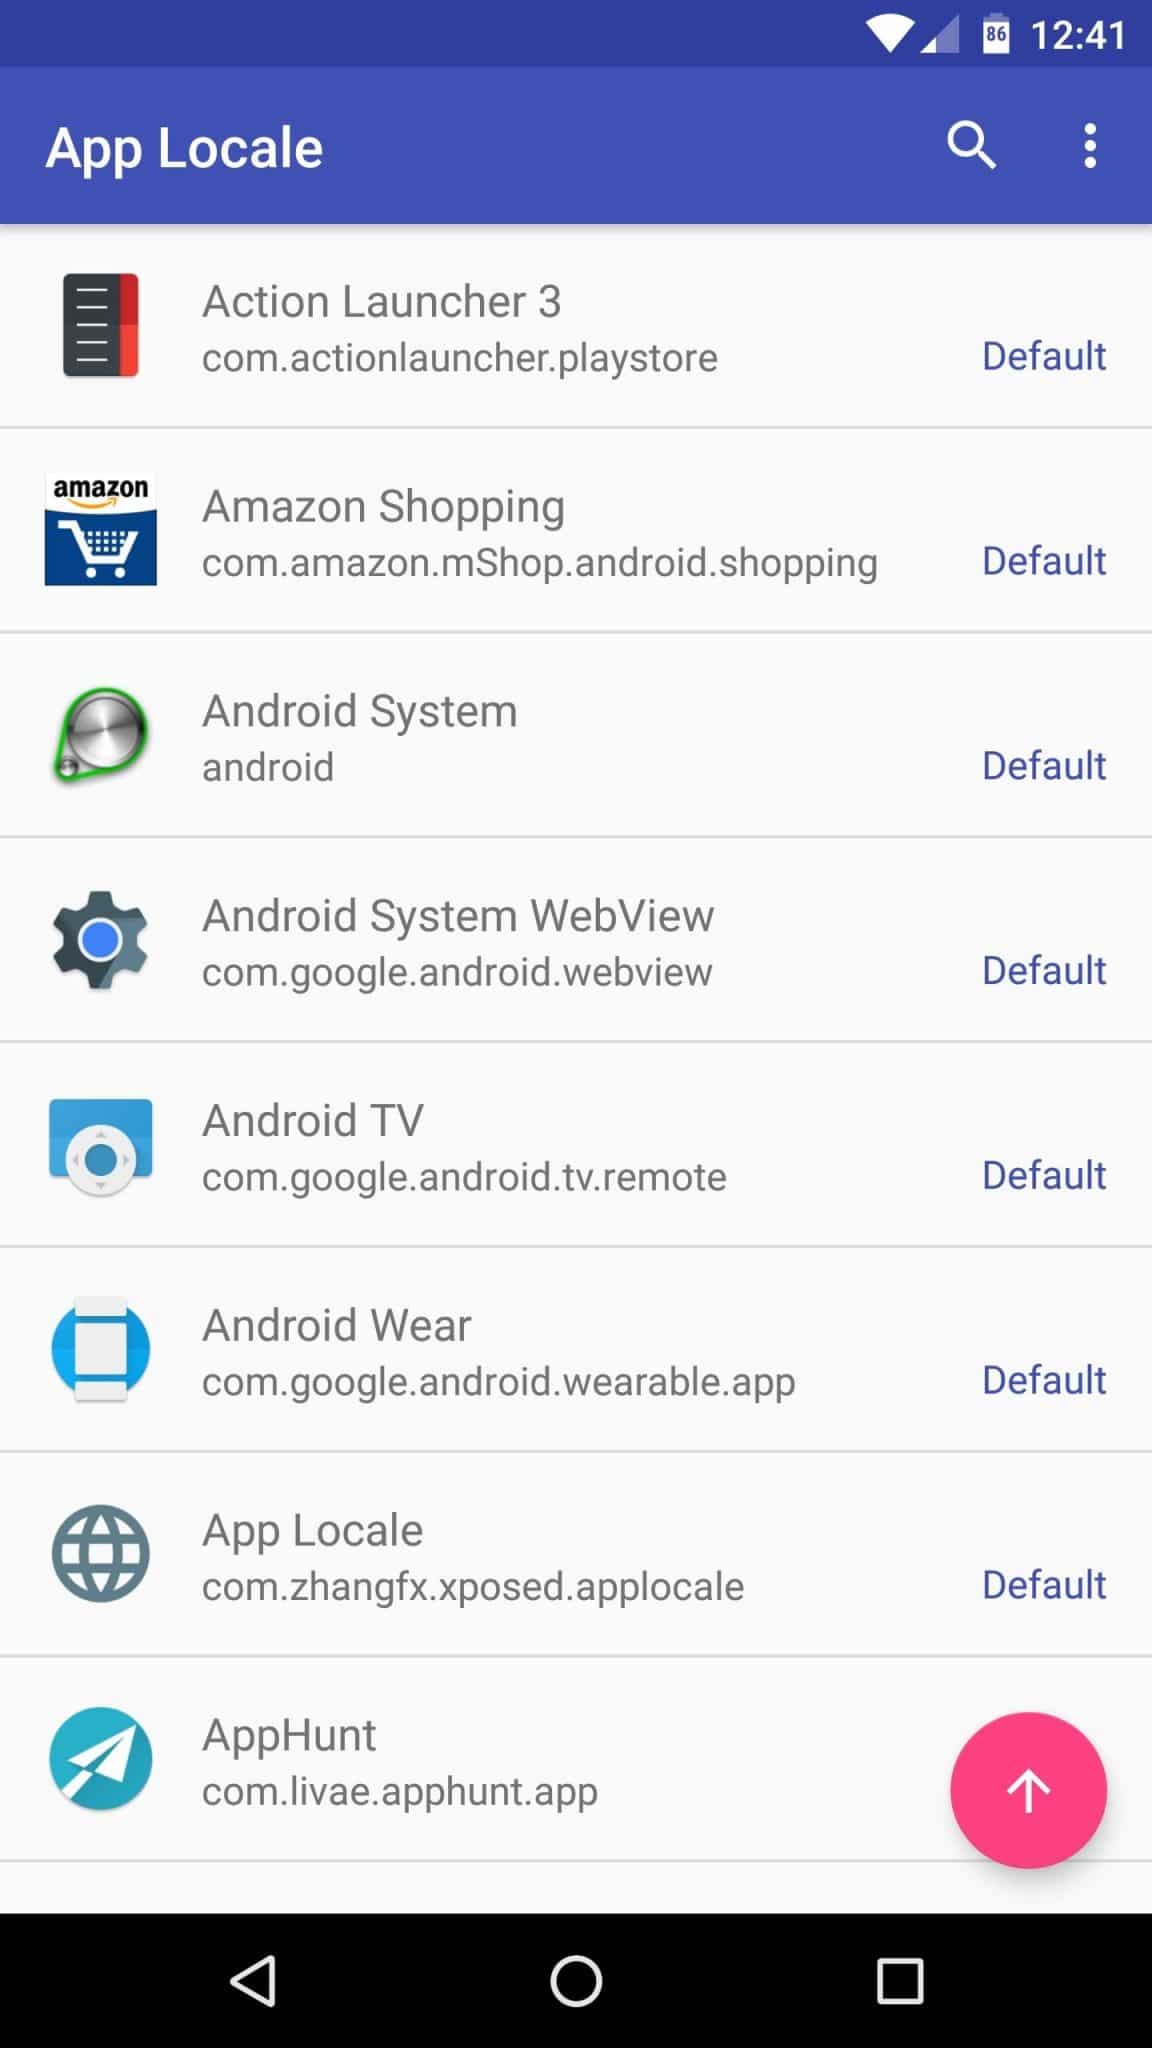 List of apps installed on your device